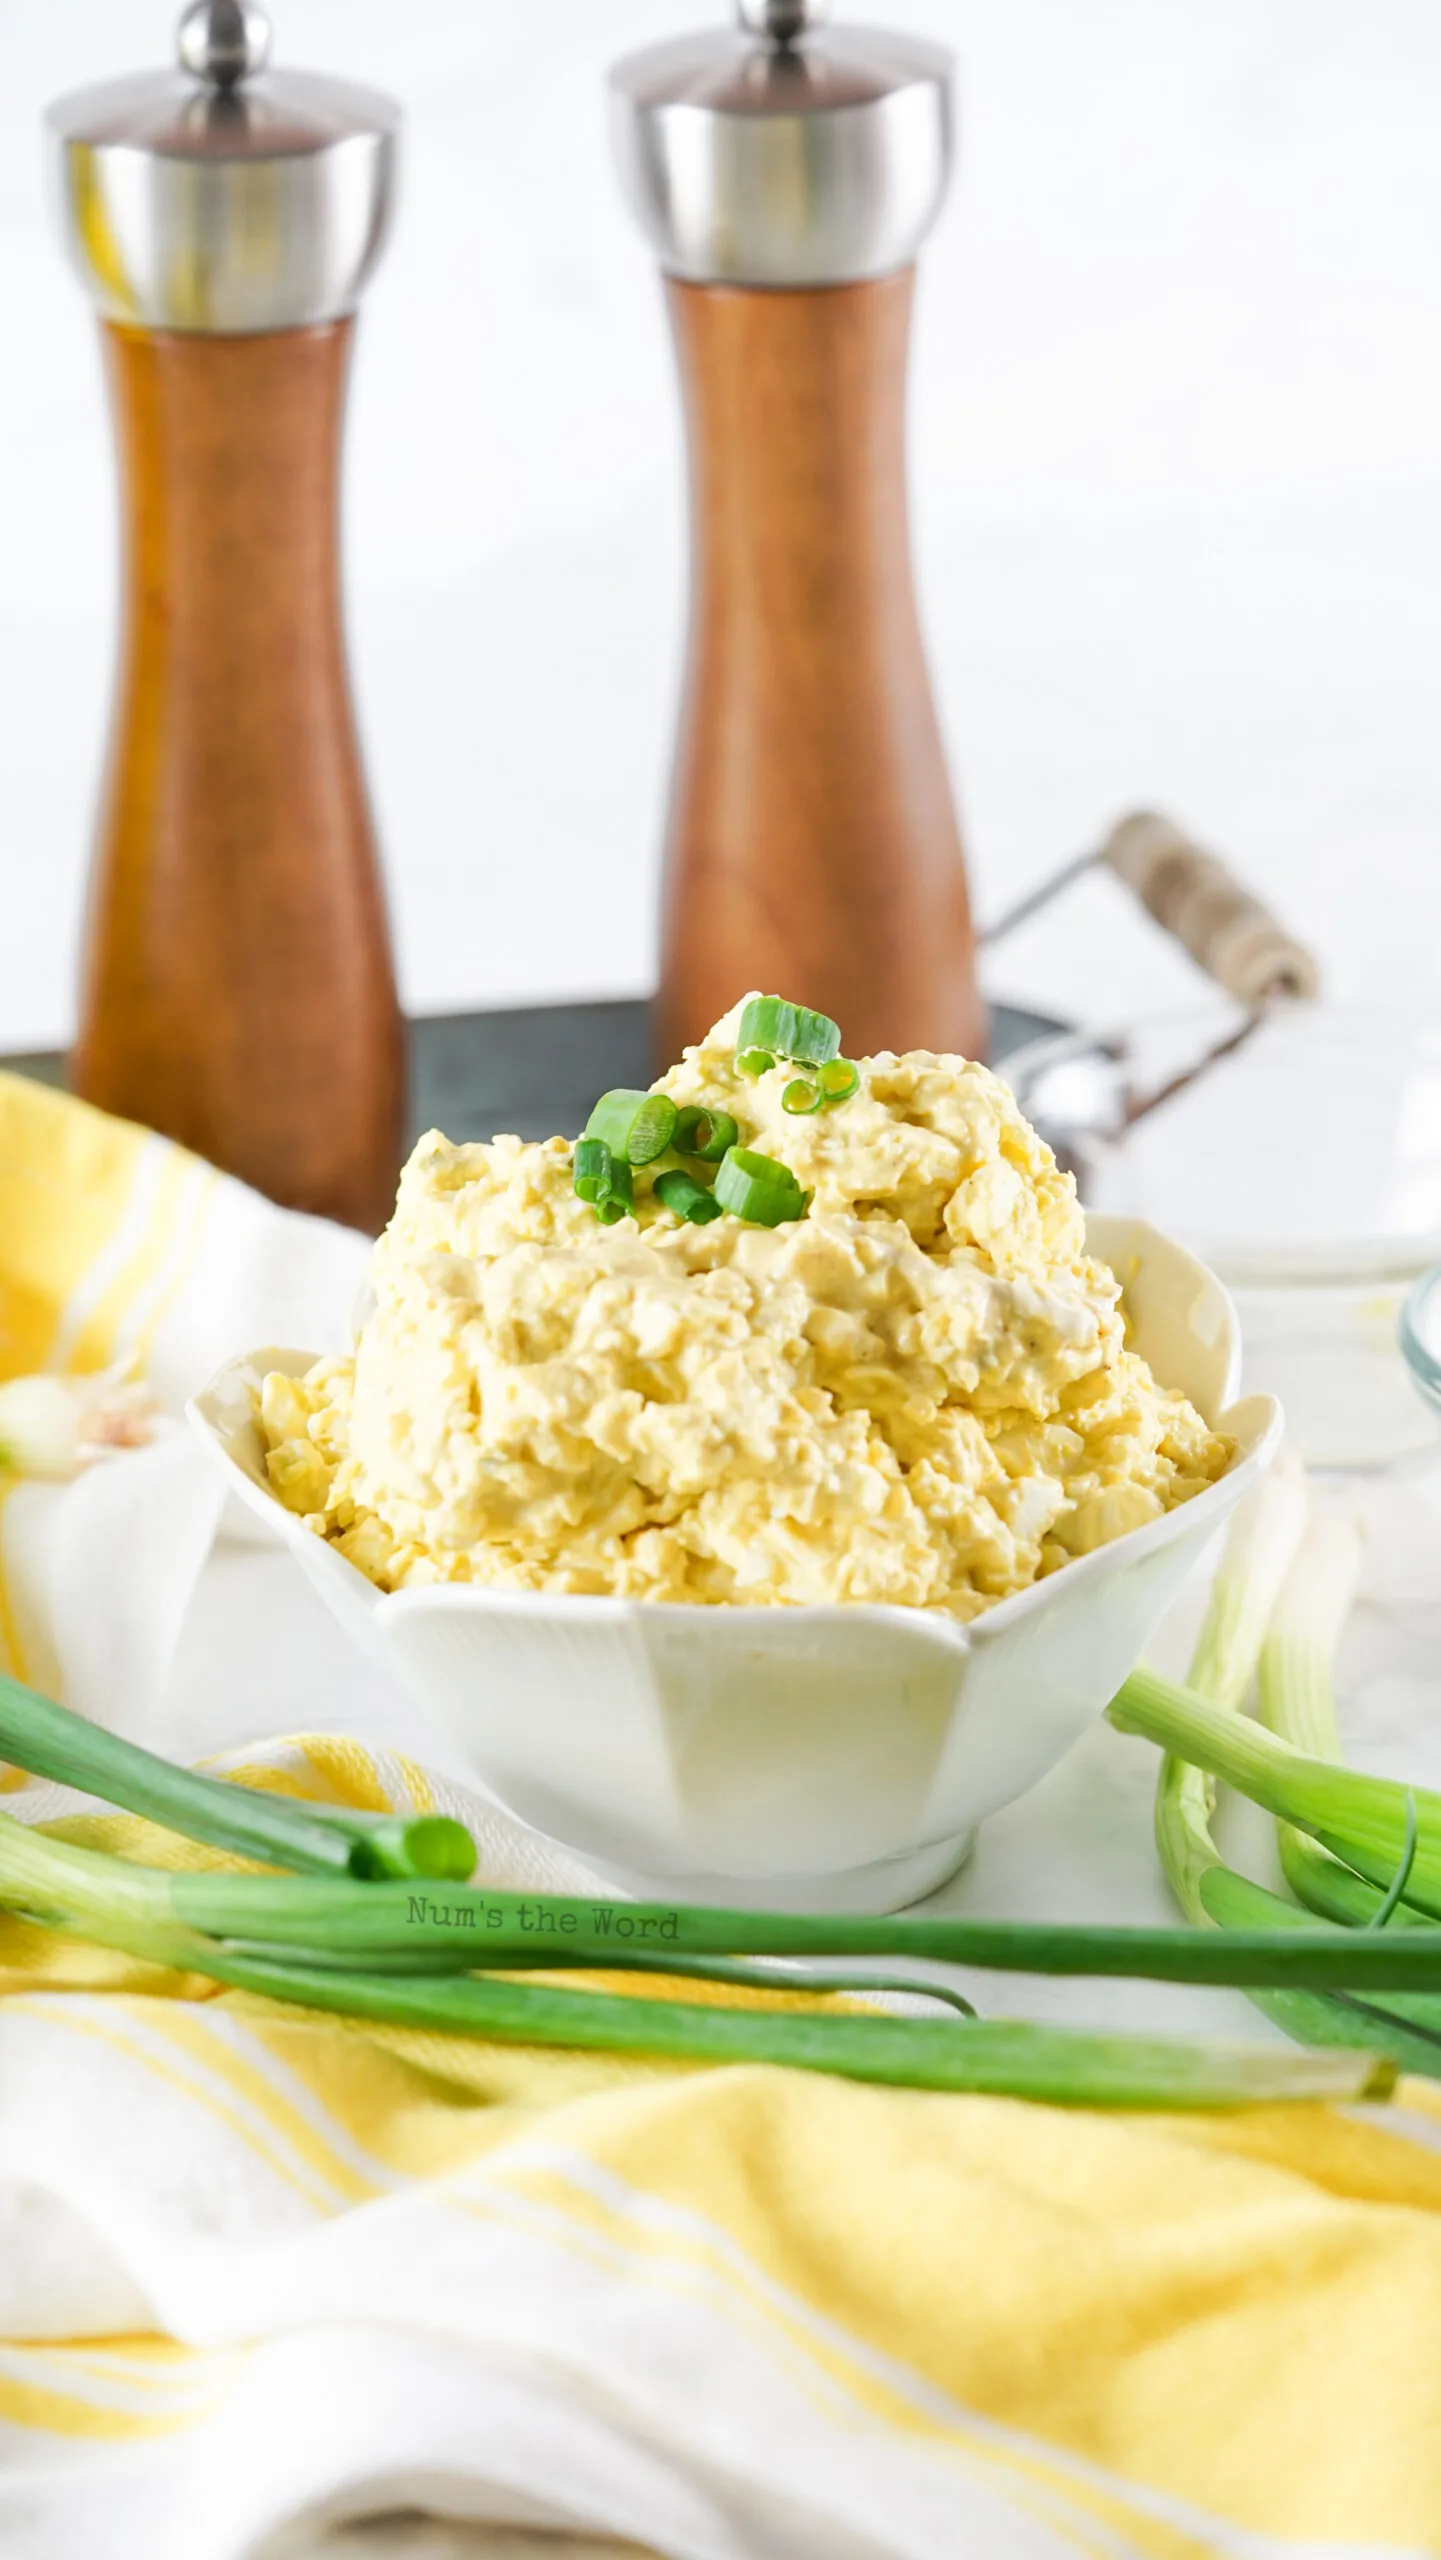 Bowl of egg salad with salt and pepper shakers in background.